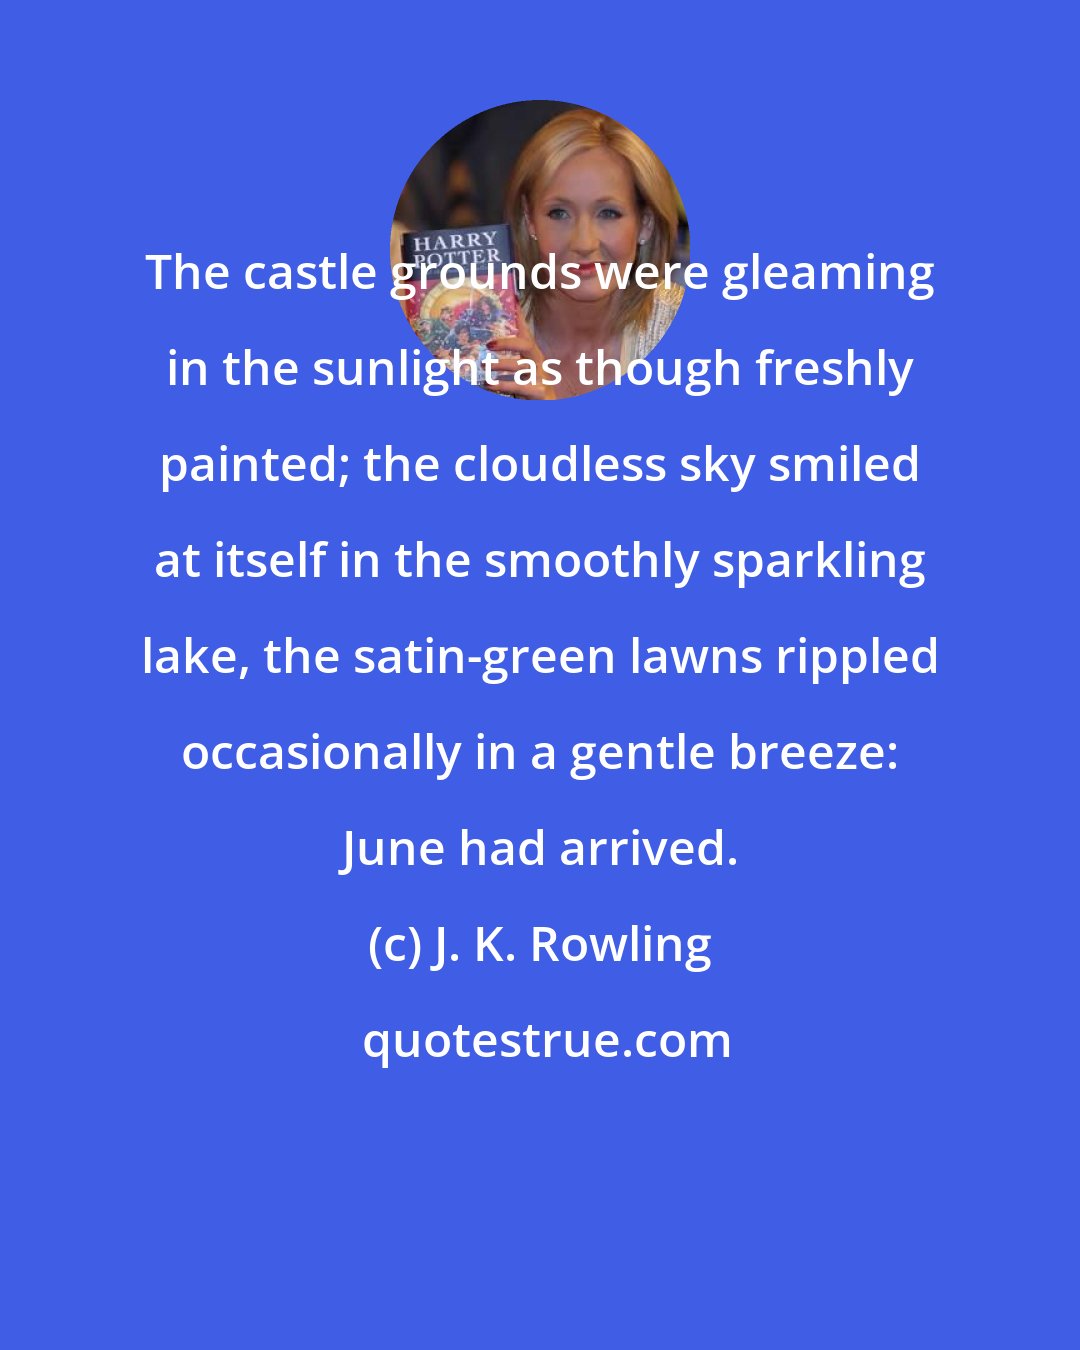 J. K. Rowling: The castle grounds were gleaming in the sunlight as though freshly painted; the cloudless sky smiled at itself in the smoothly sparkling lake, the satin-green lawns rippled occasionally in a gentle breeze: June had arrived.